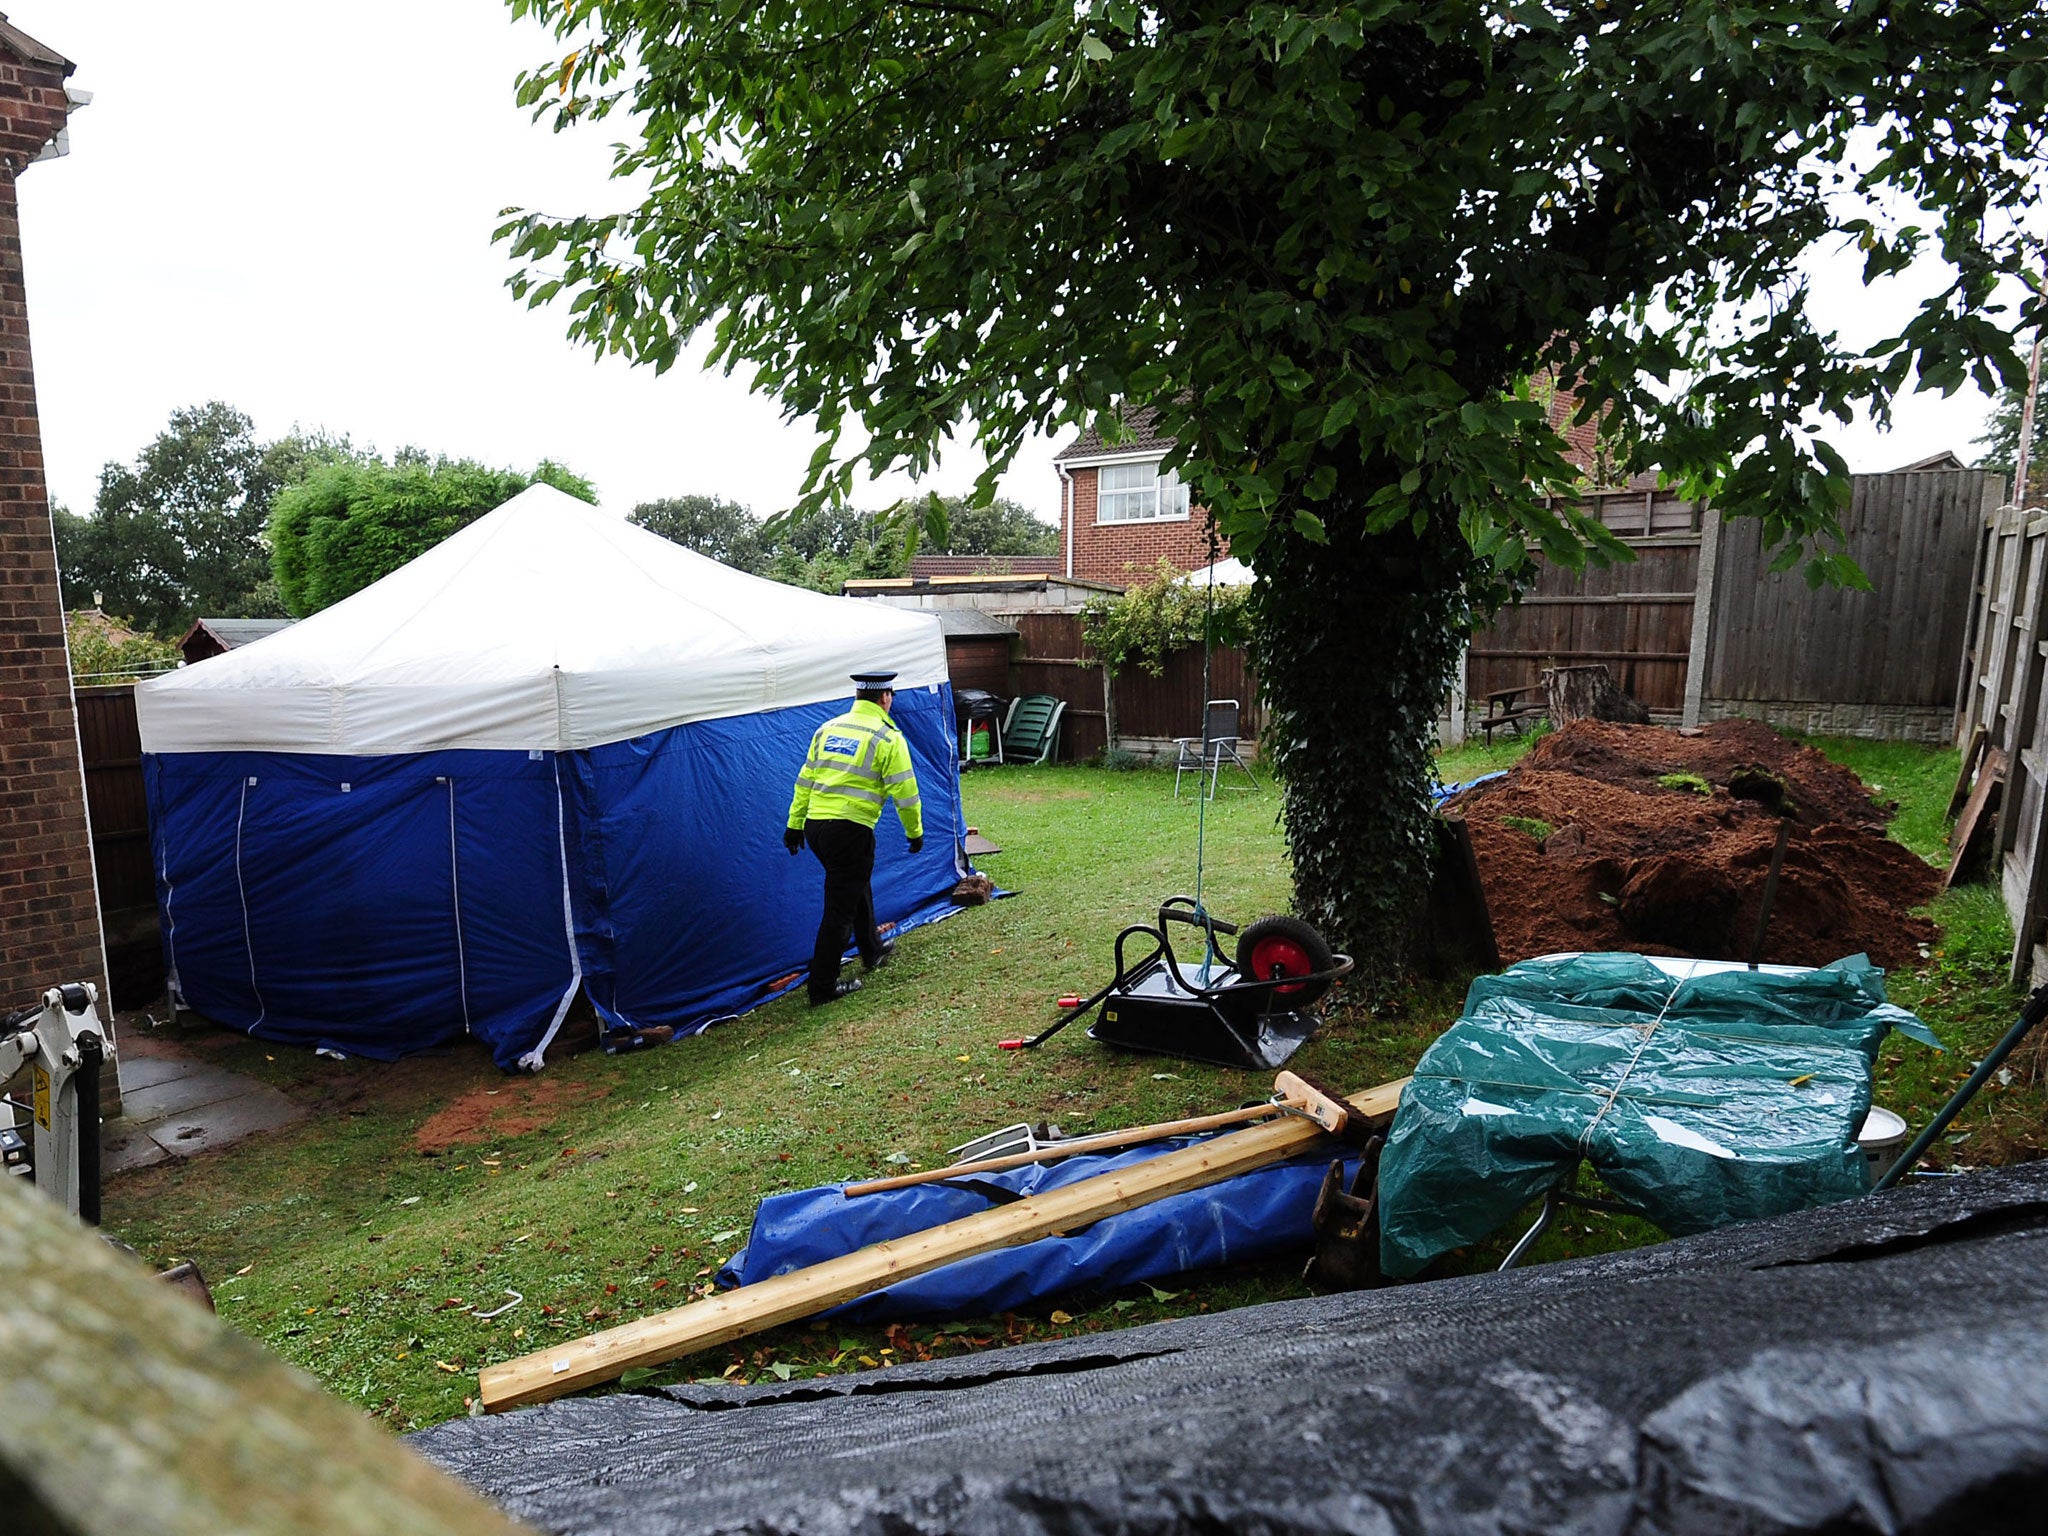 The remains of two people have been found in the garden of a house in Blenheim Close, Forest Town, near Mansfield